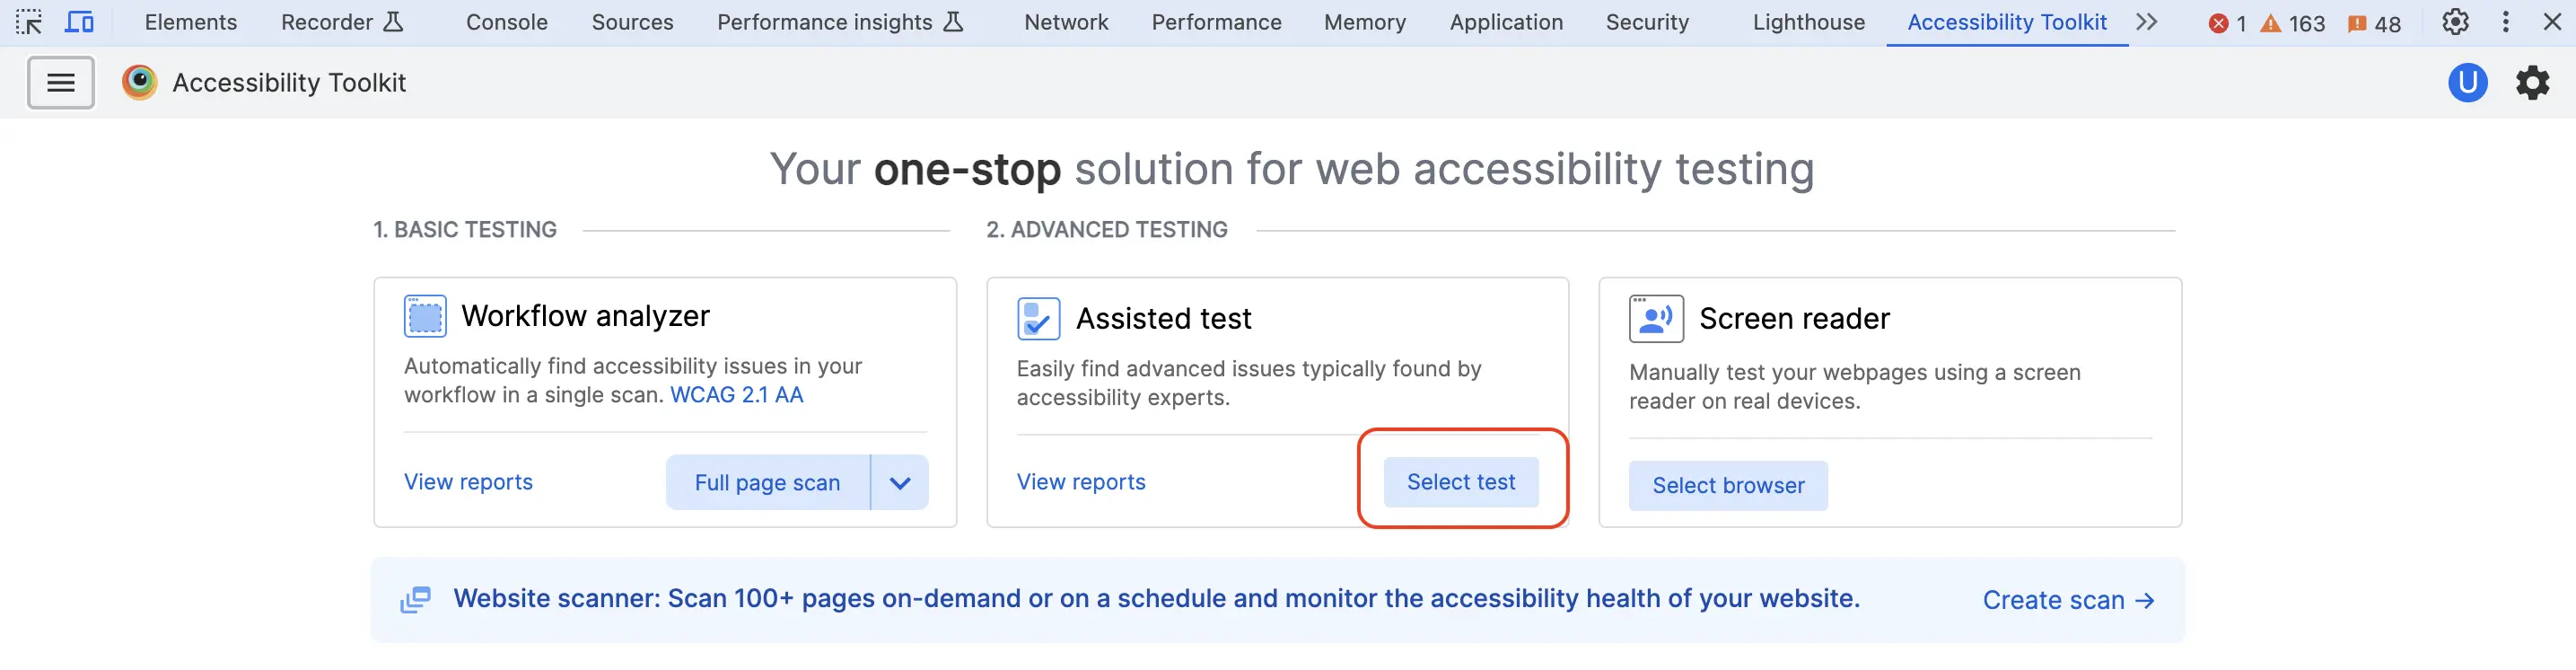 Click Select test to launch an assisted test